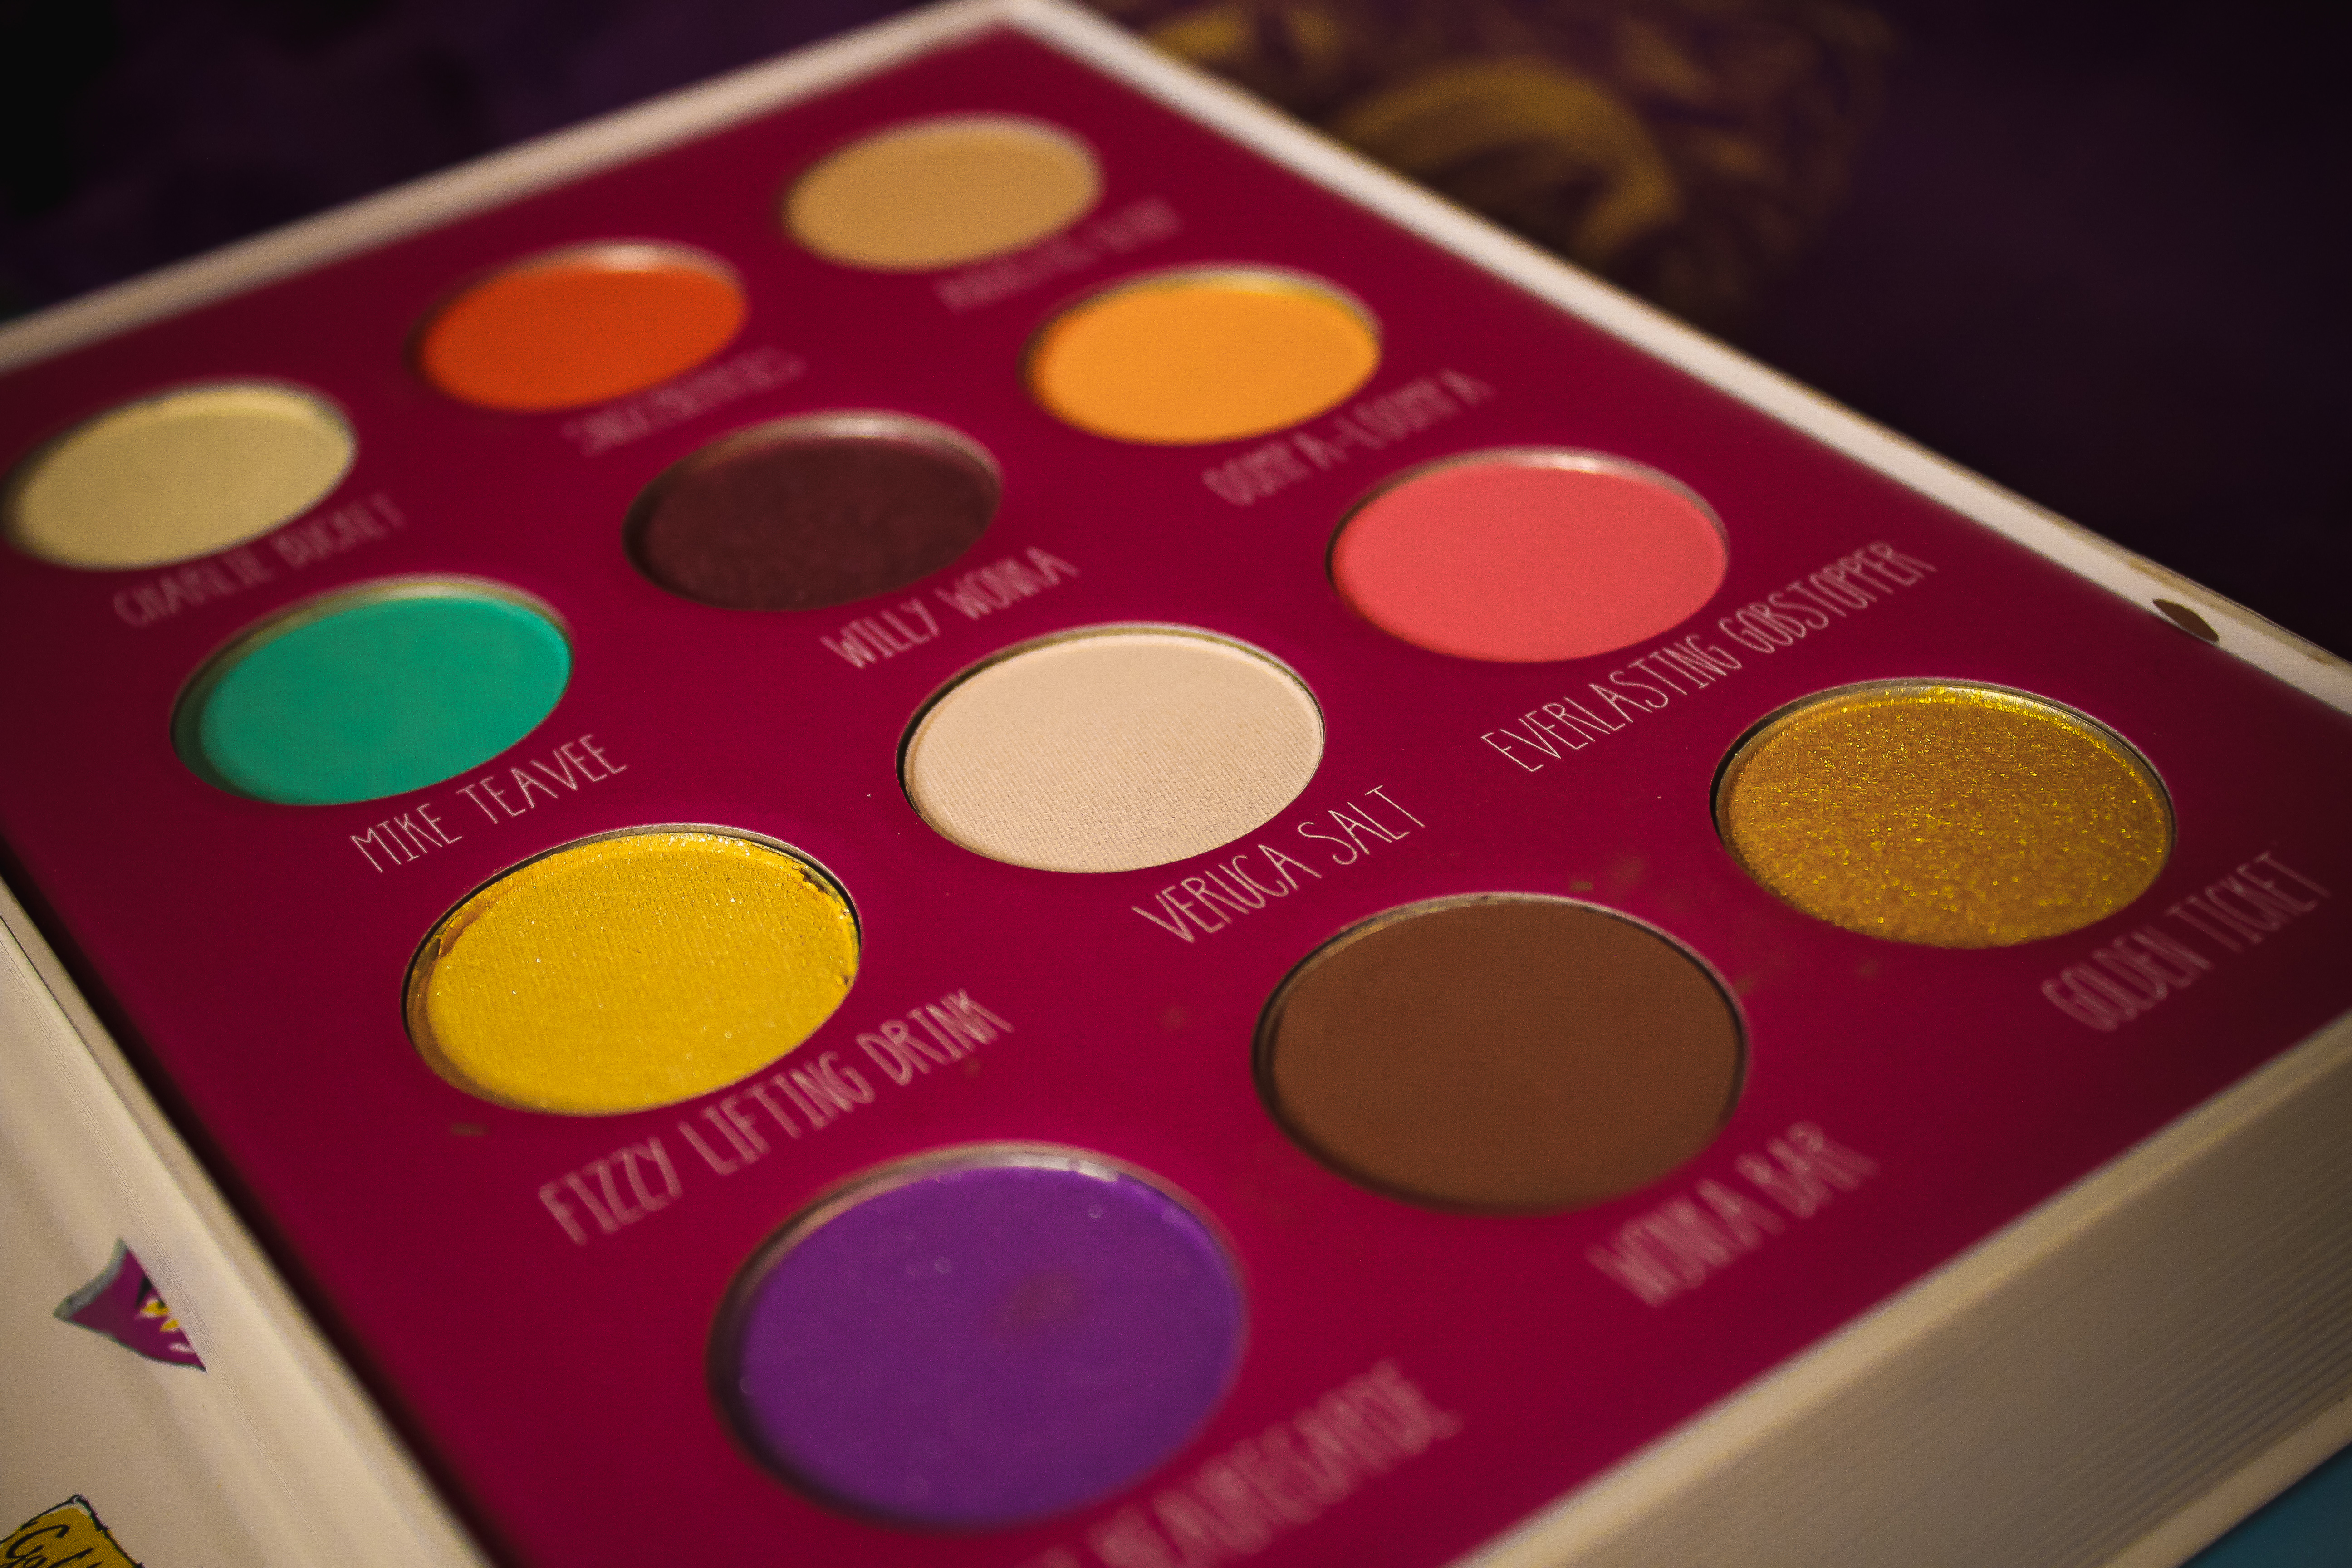 Storybook Cosmetics Charlie and the Chocolate Factory 6.jpg